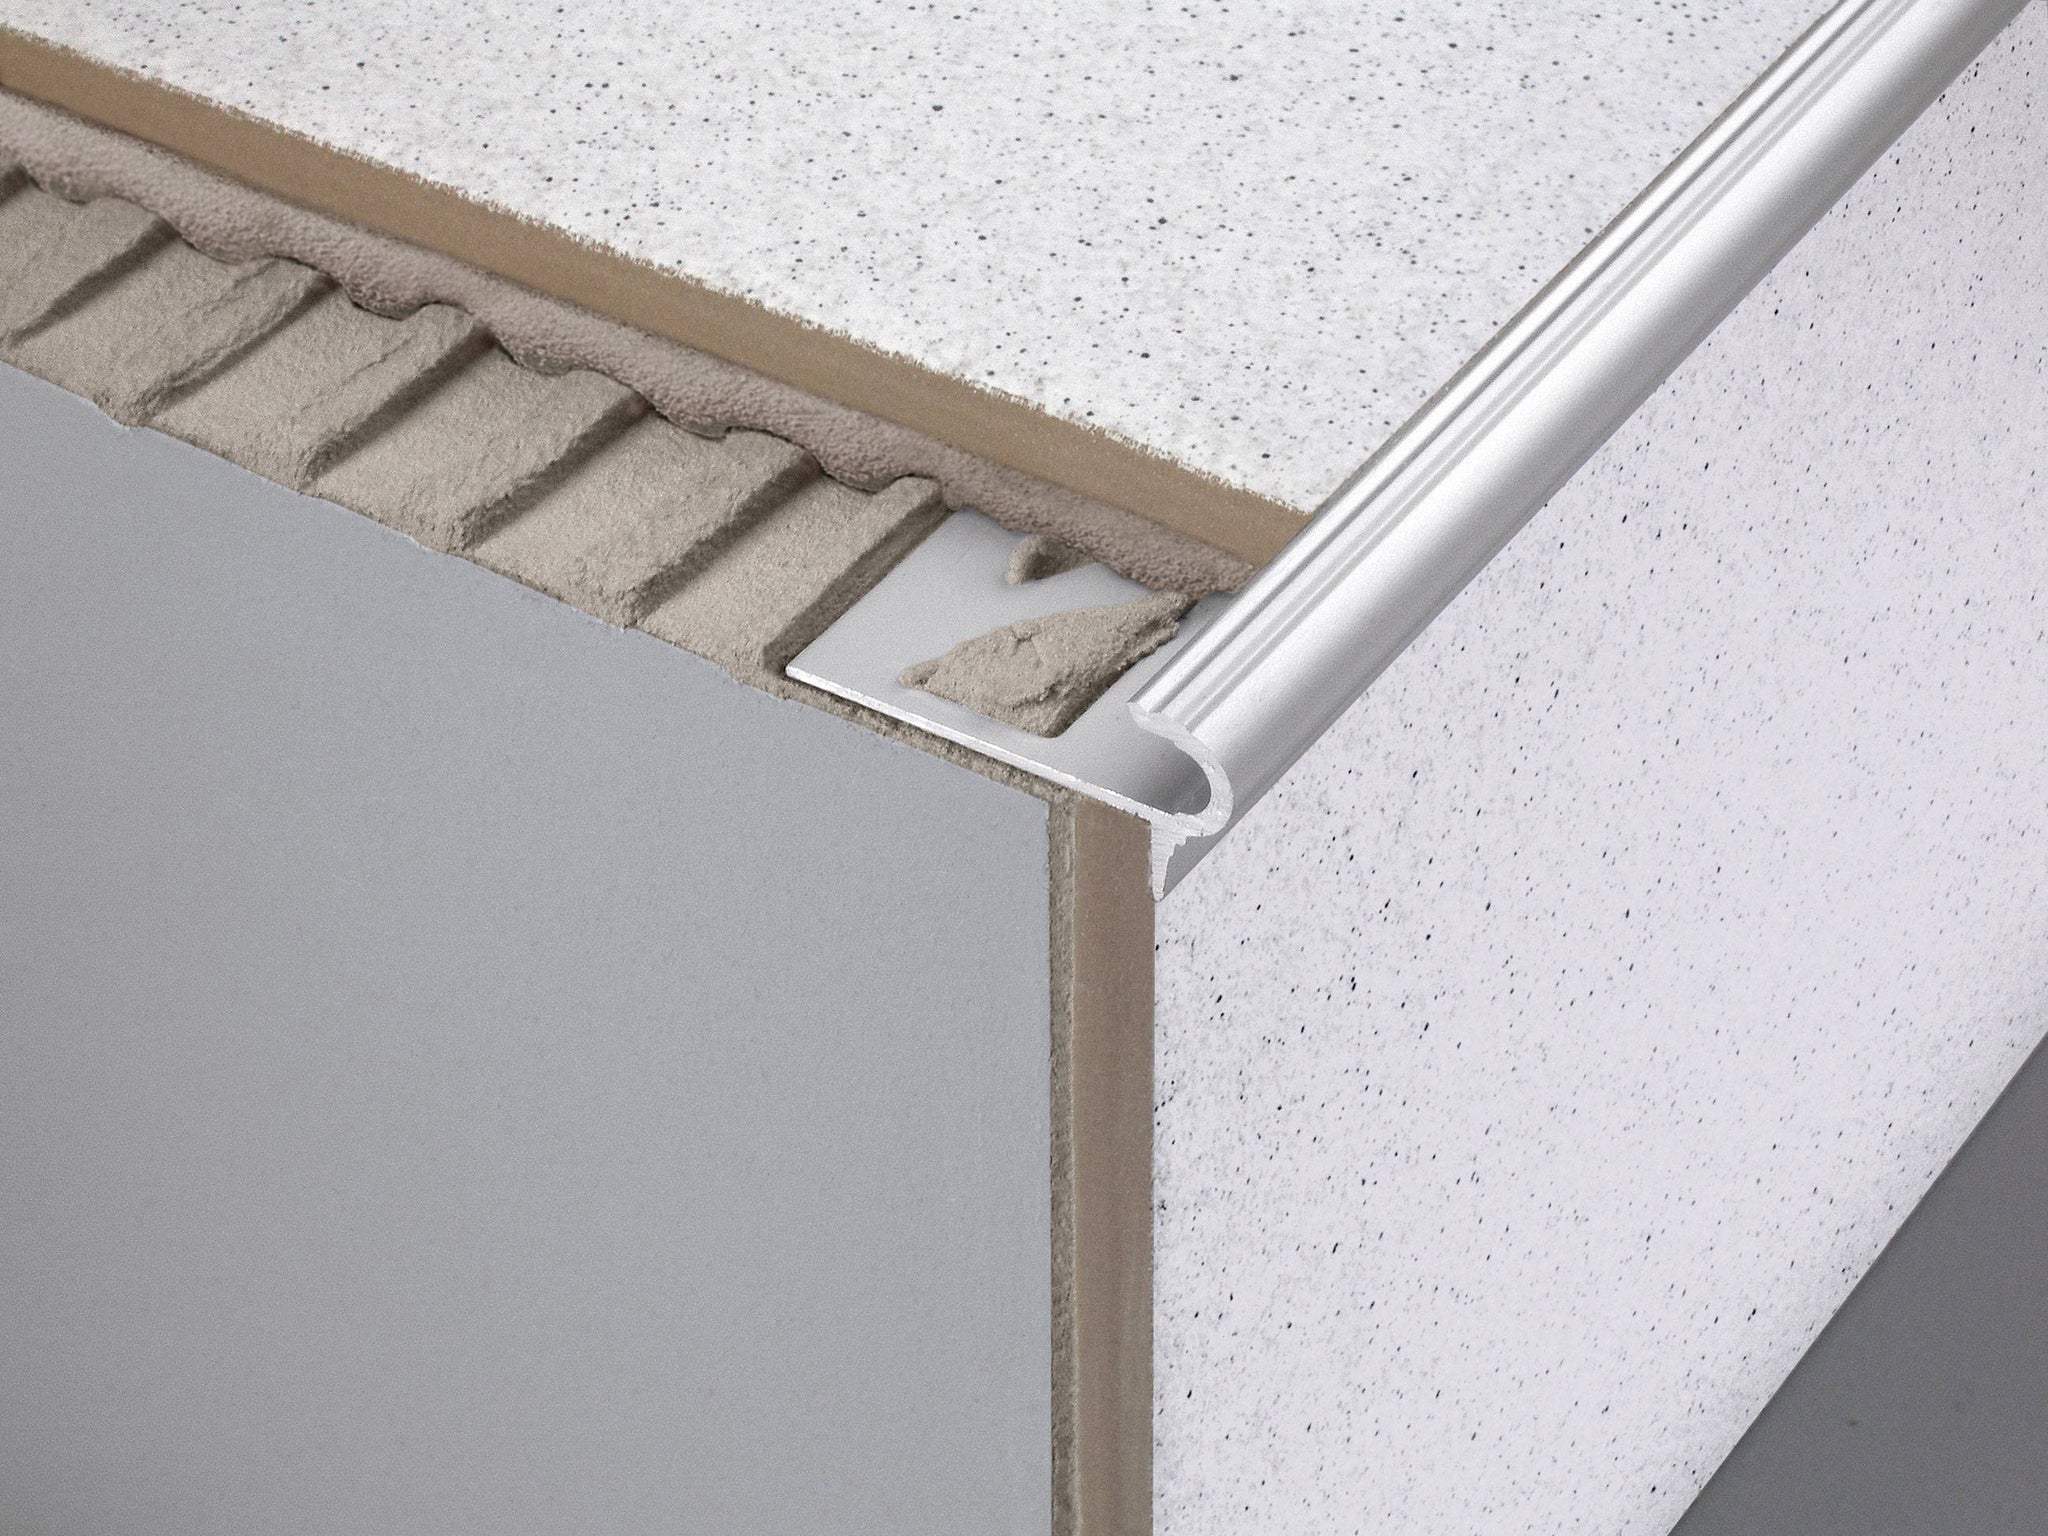 FLORENTOSTEP Stair nosing profile - 1/2 in H - Silver anodized - Aluminum in florentine styel